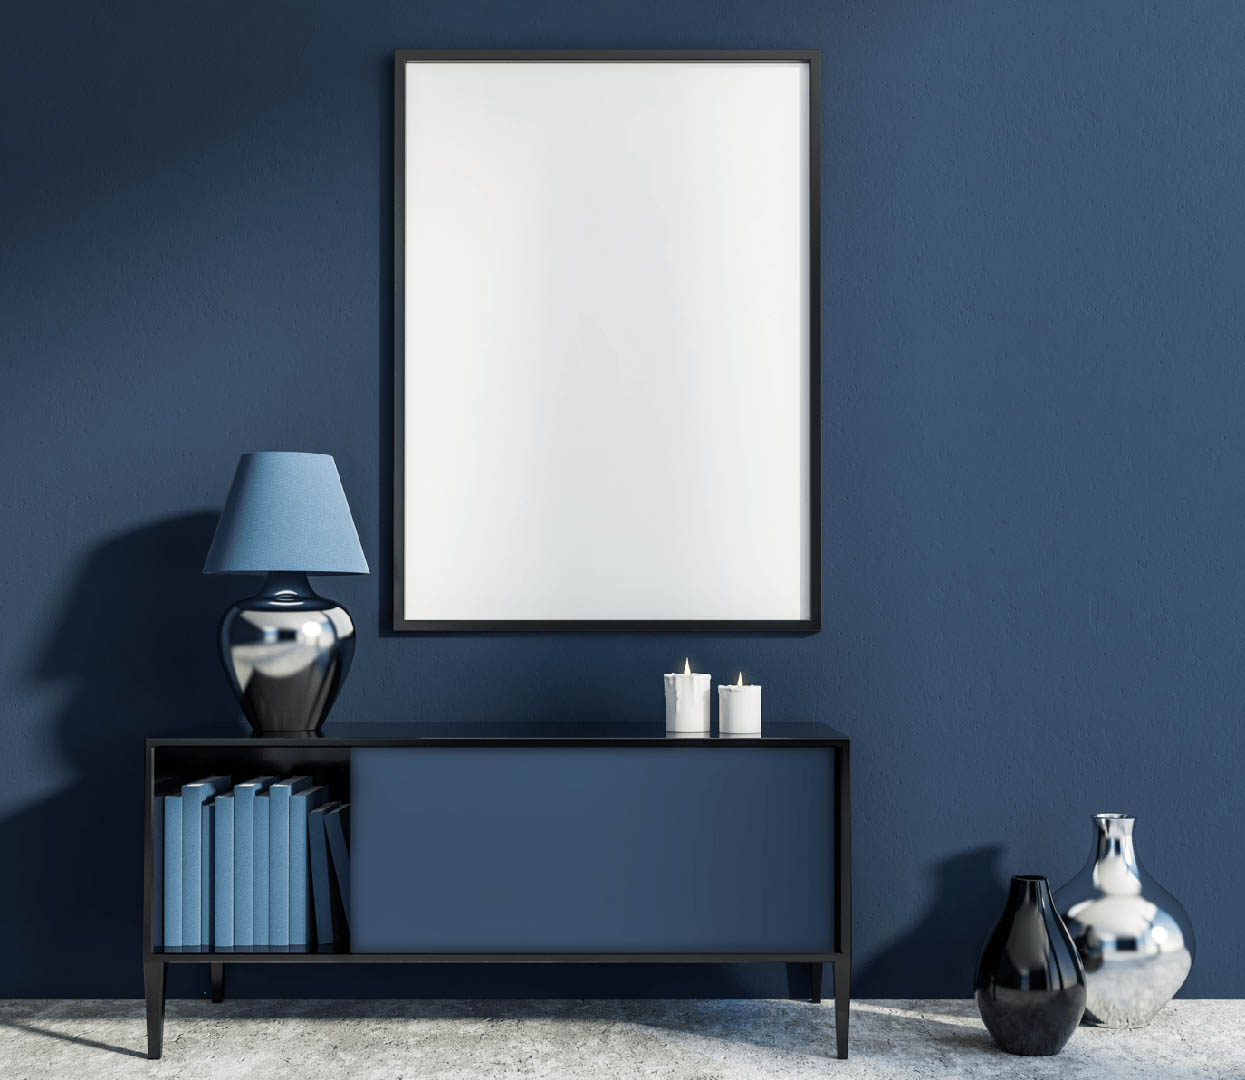 Broadview’s Top Colour Trends for Your Home Blue Image